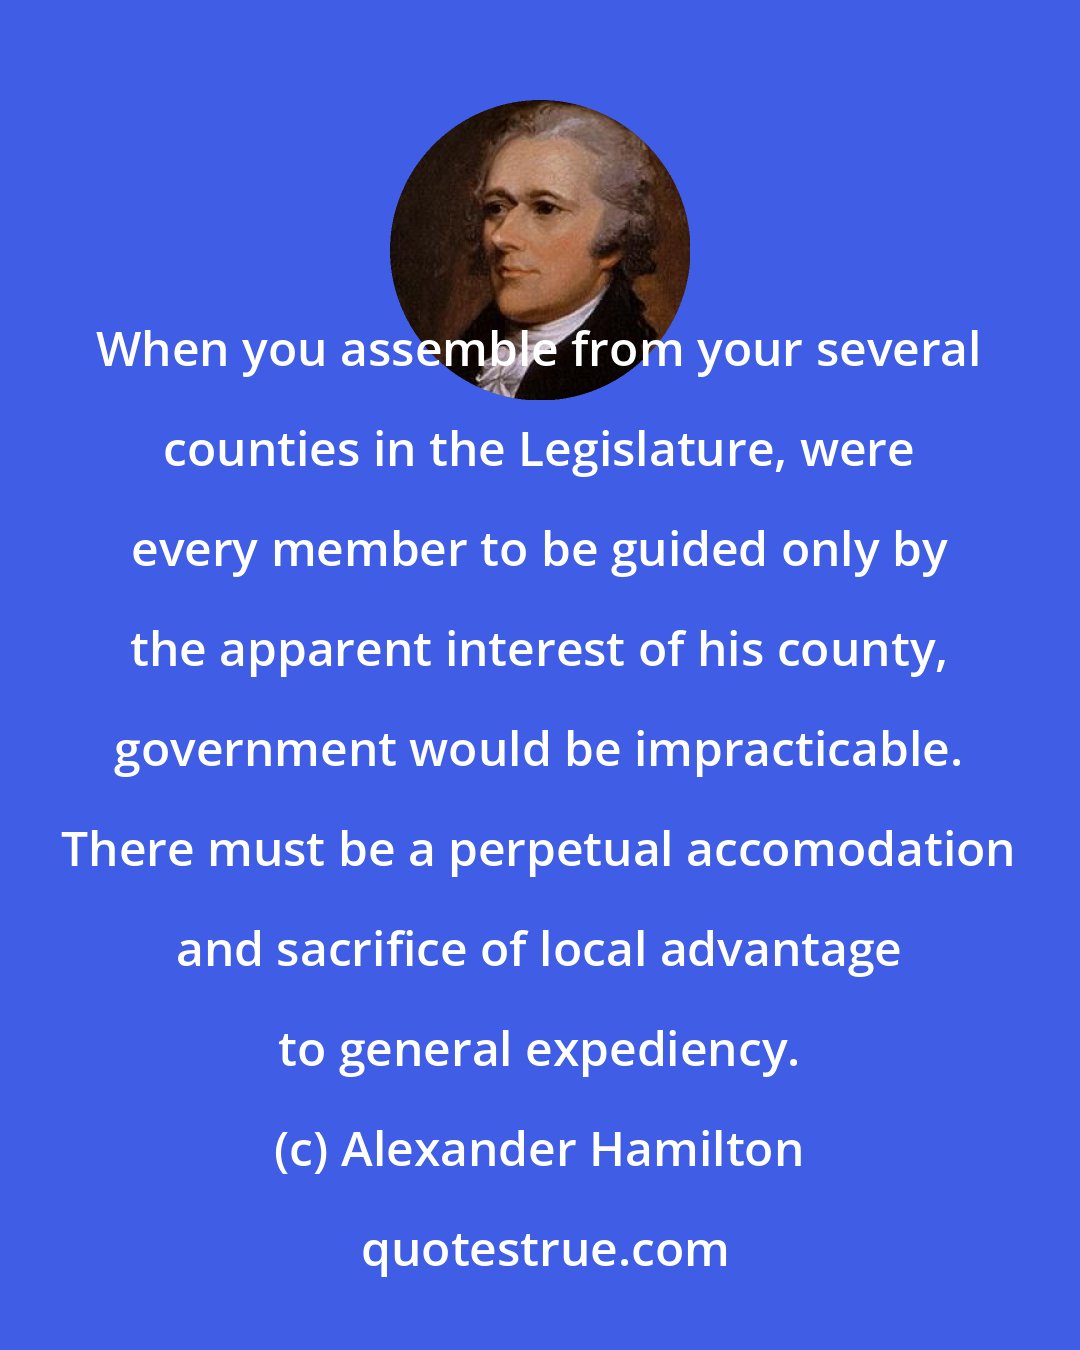 Alexander Hamilton: When you assemble from your several counties in the Legislature, were every member to be guided only by the apparent interest of his county, government would be impracticable. There must be a perpetual accomodation and sacrifice of local advantage to general expediency.